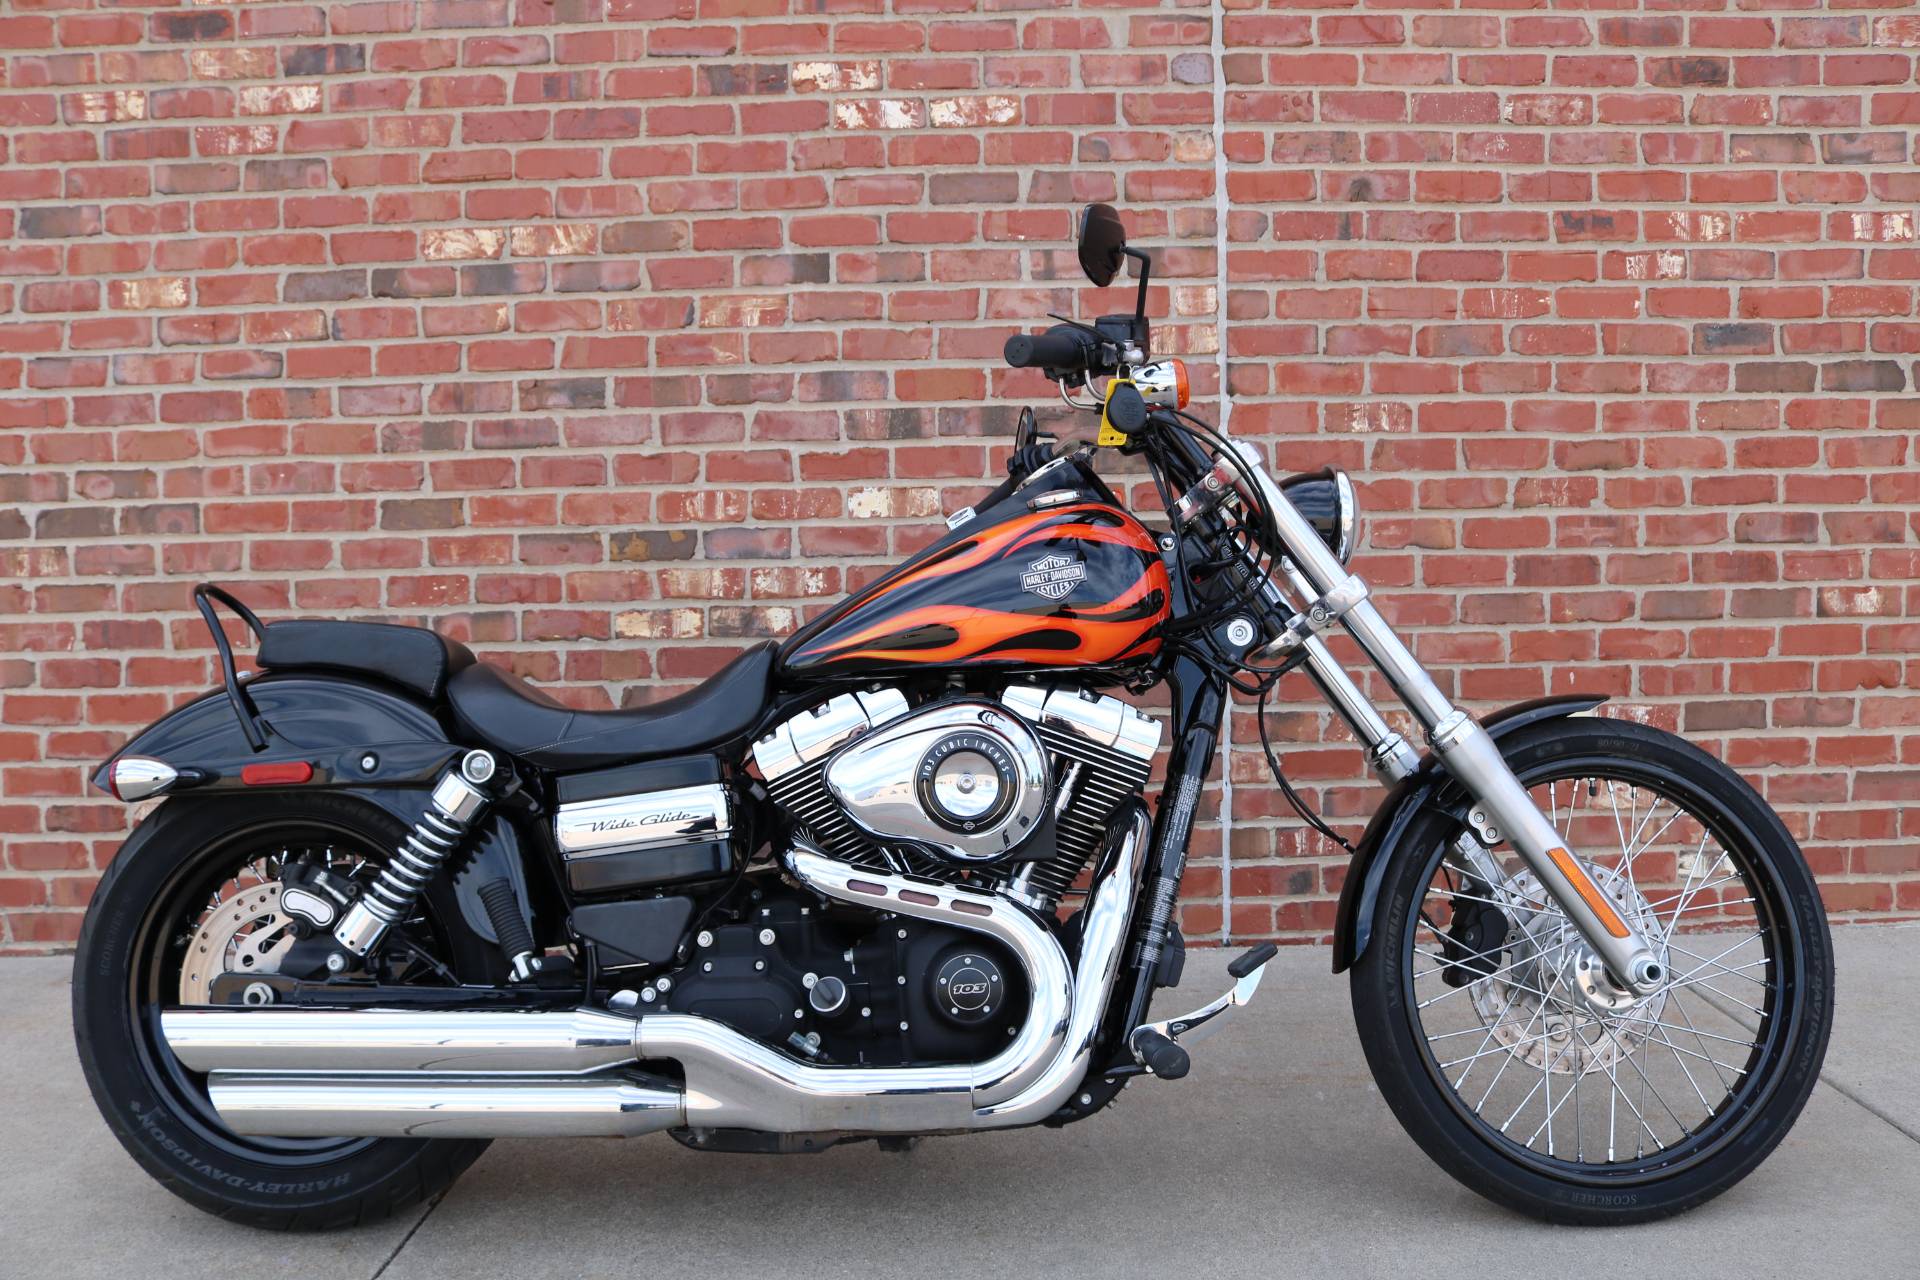 Used 2014 Harley  Davidson  Dyna  Wide  Glide   Motorcycles 